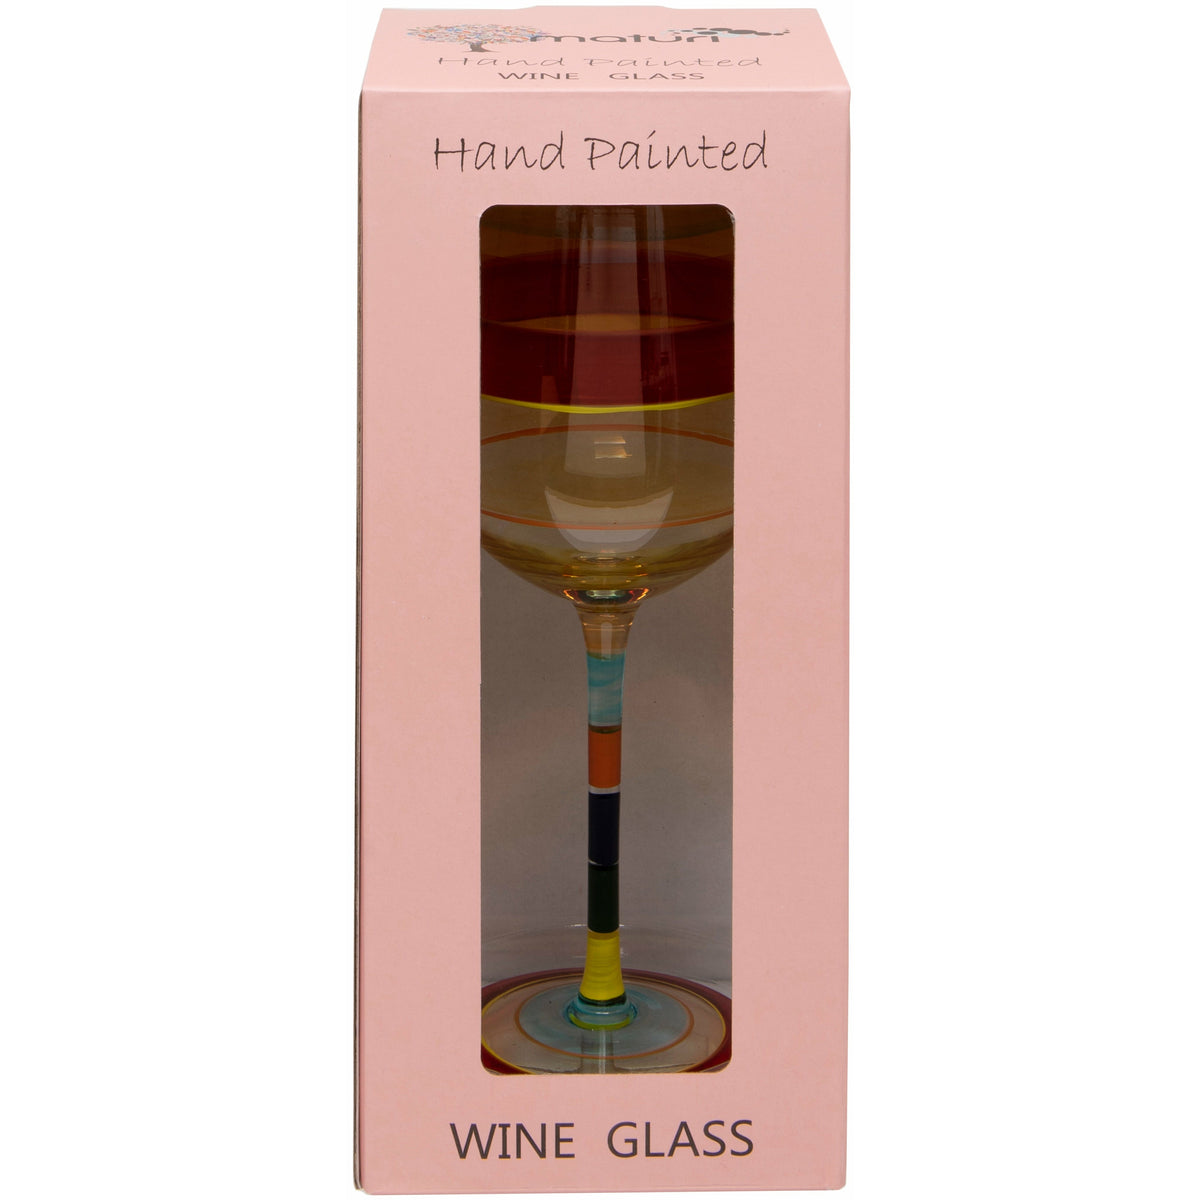 Hand Painted Light Stripe Wine Glass in Box